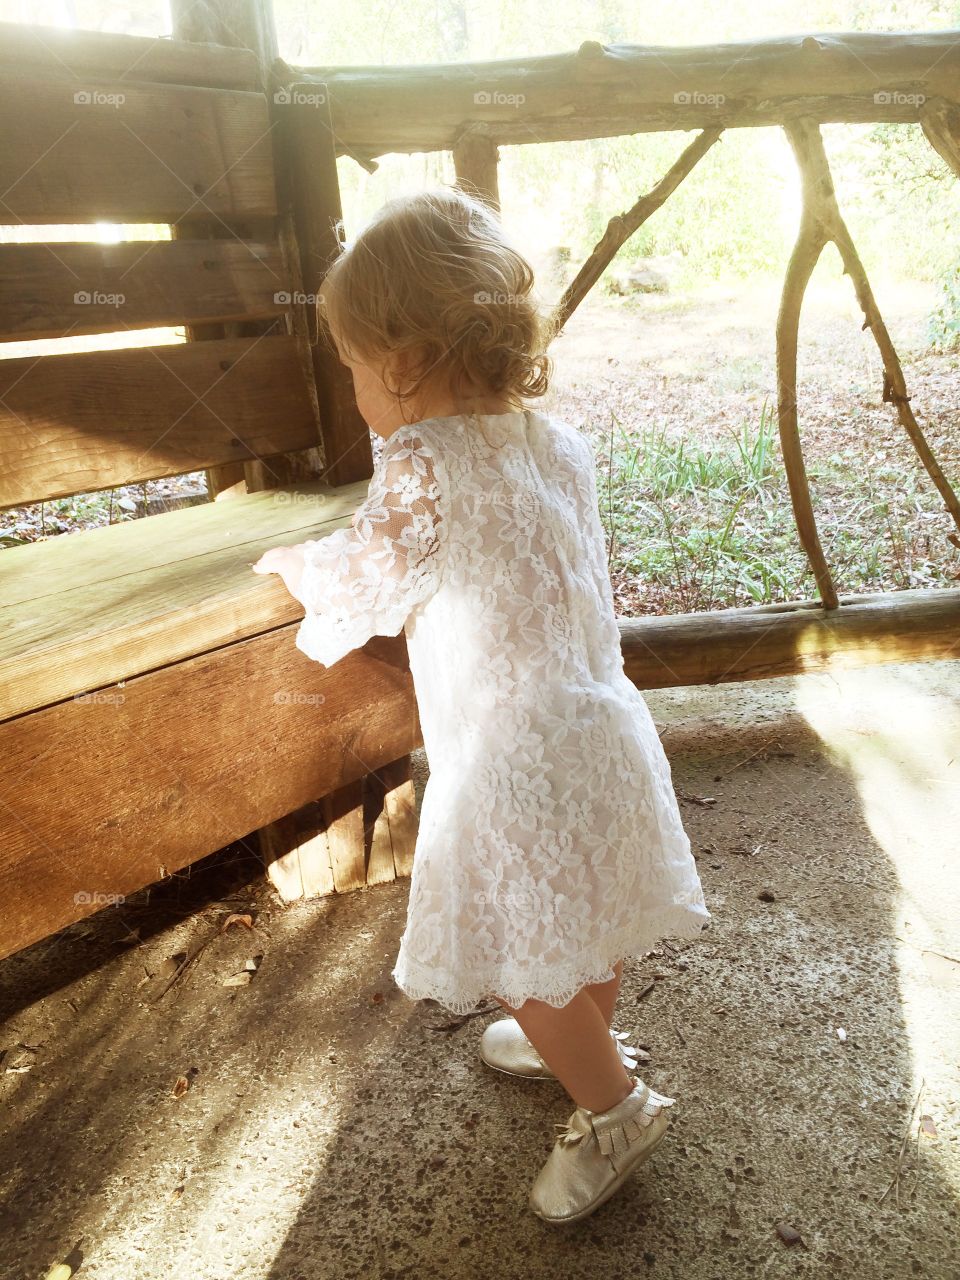 Toddler baby girl with curly blonde hair in white lace dress by wooden bench